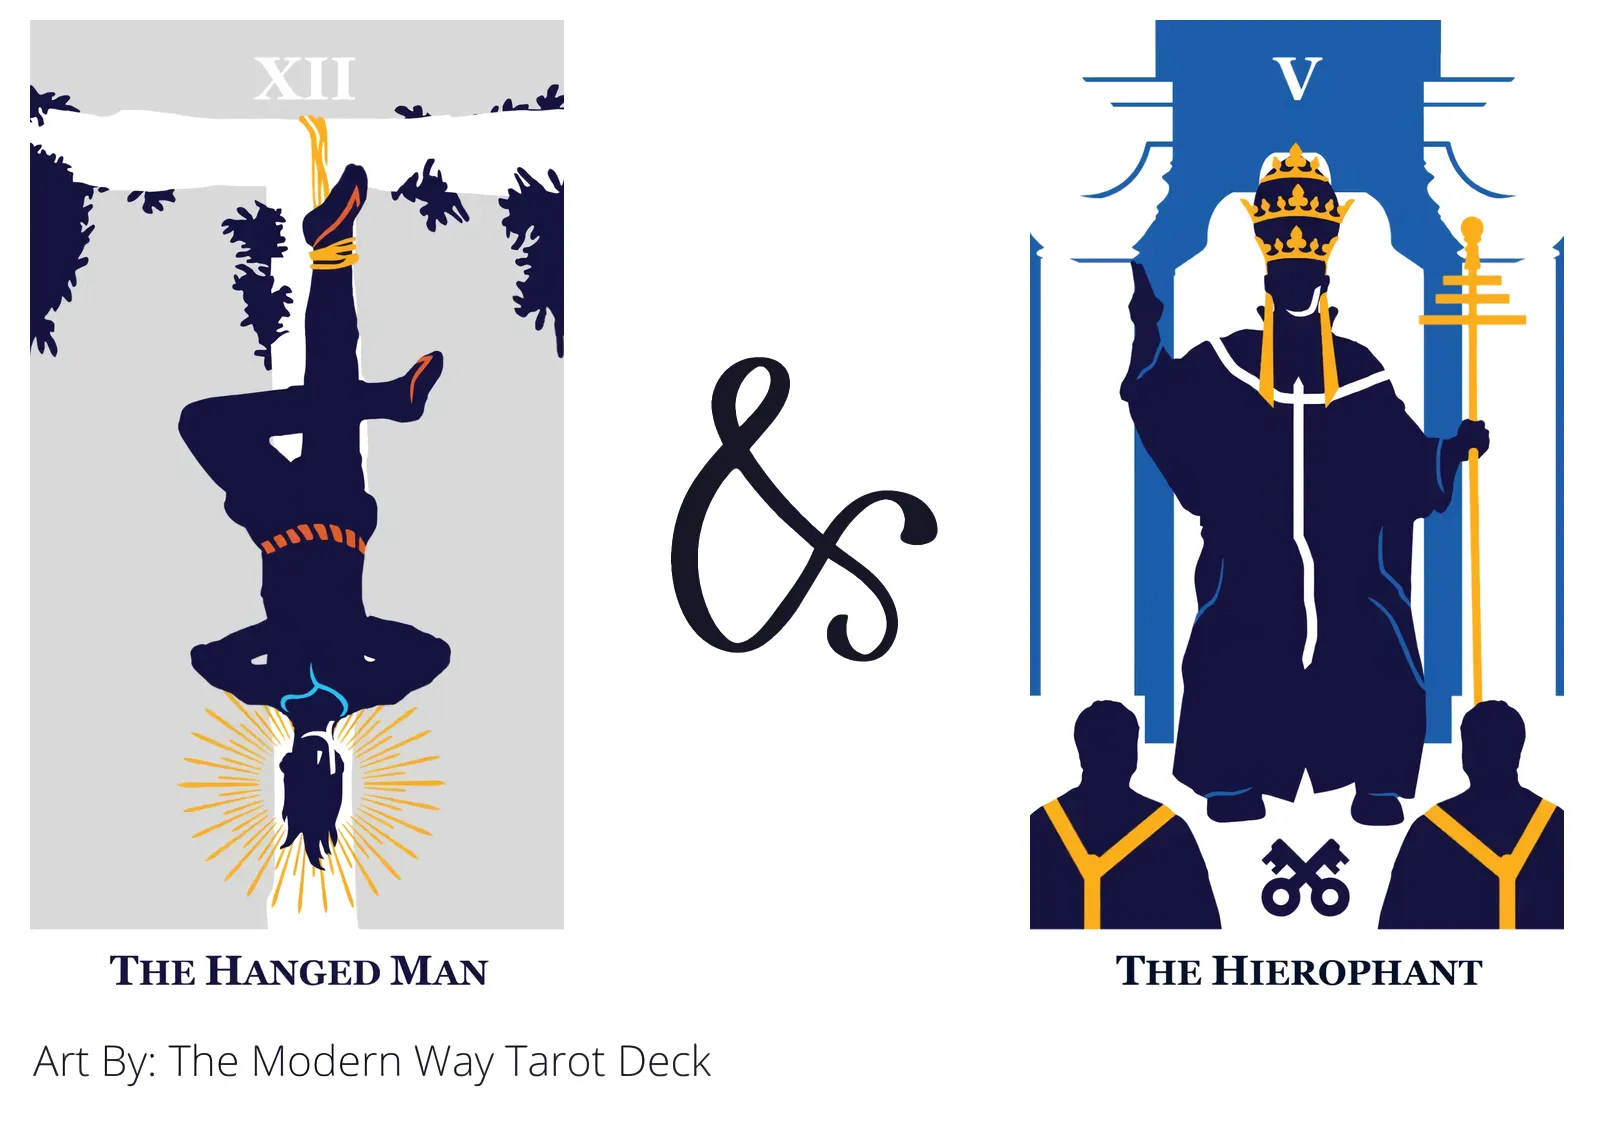 the hanged man and the hierophant tarot cards together